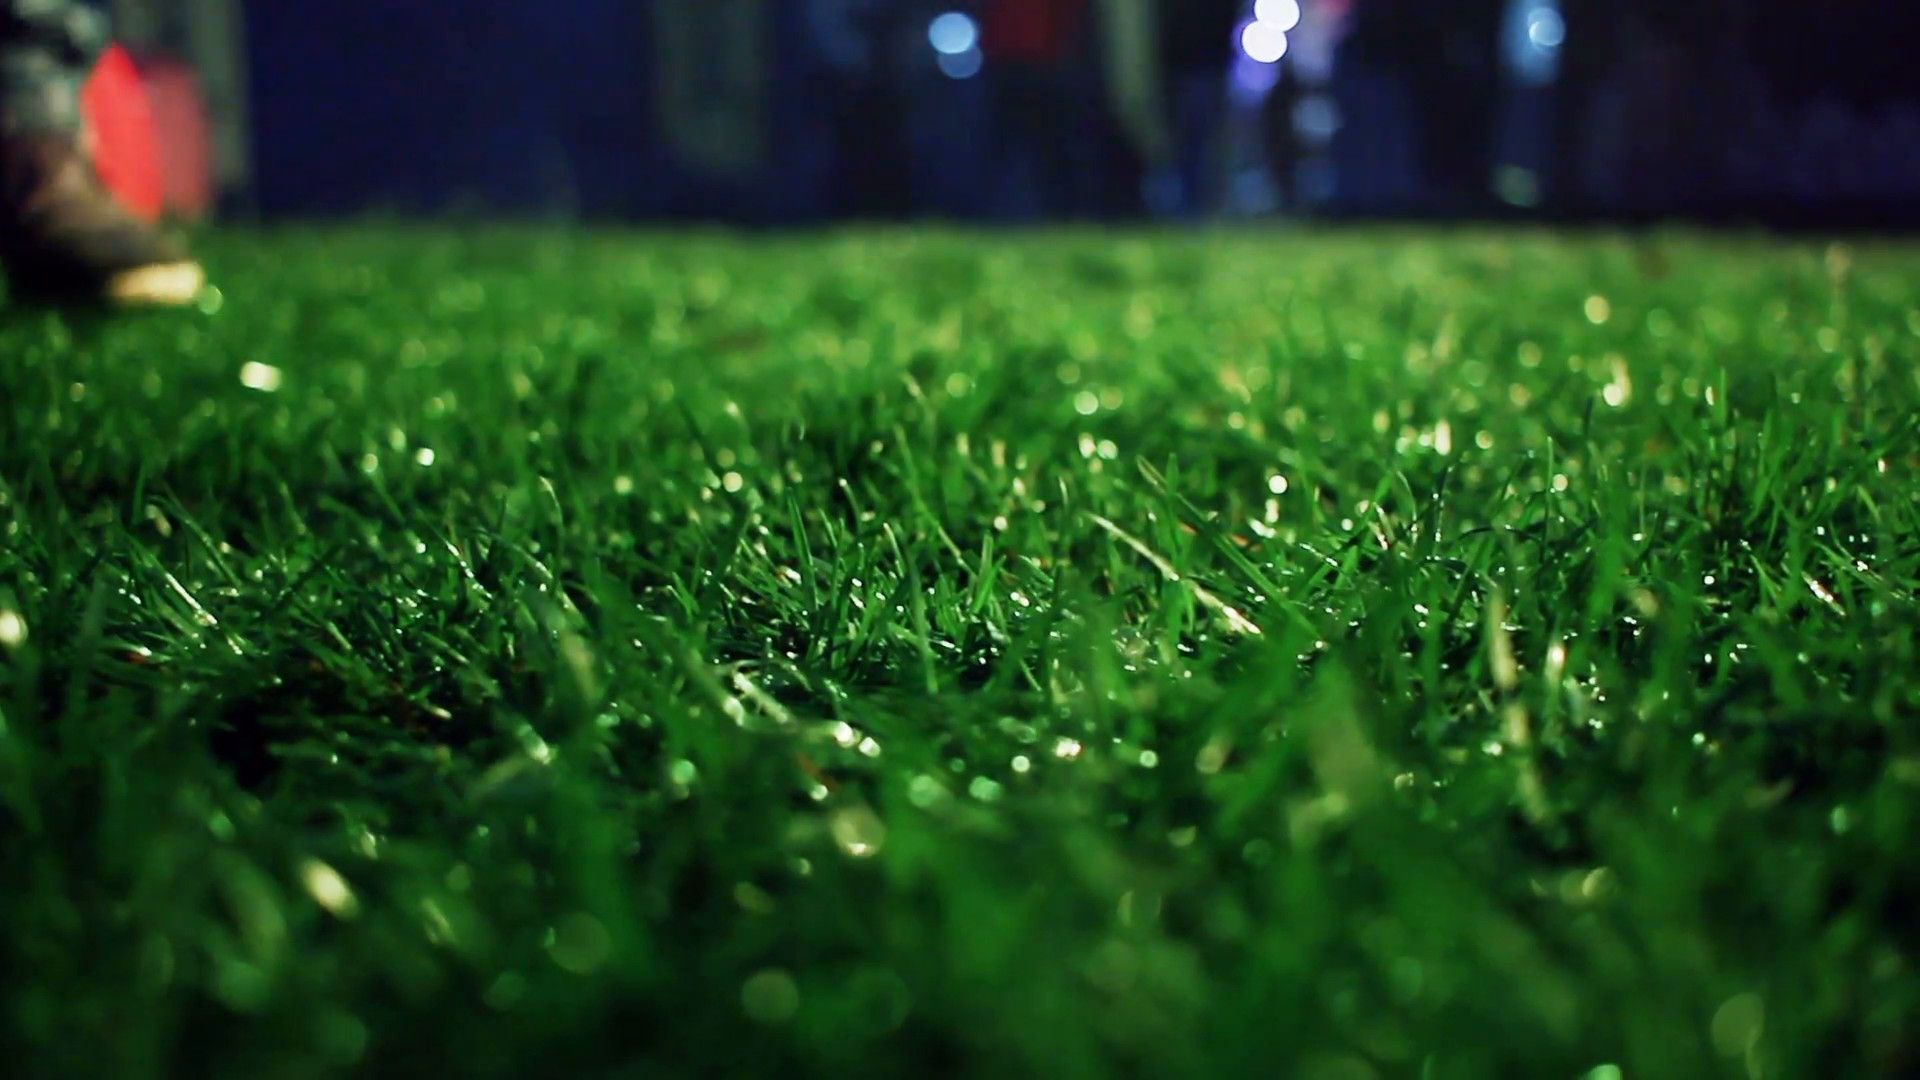 1920x1080 Grass background. Green grass soccer field. Trimmed grass on meadow at  night. Panning on grass field at park. Green background. Macro shot of lawn  grass at ...